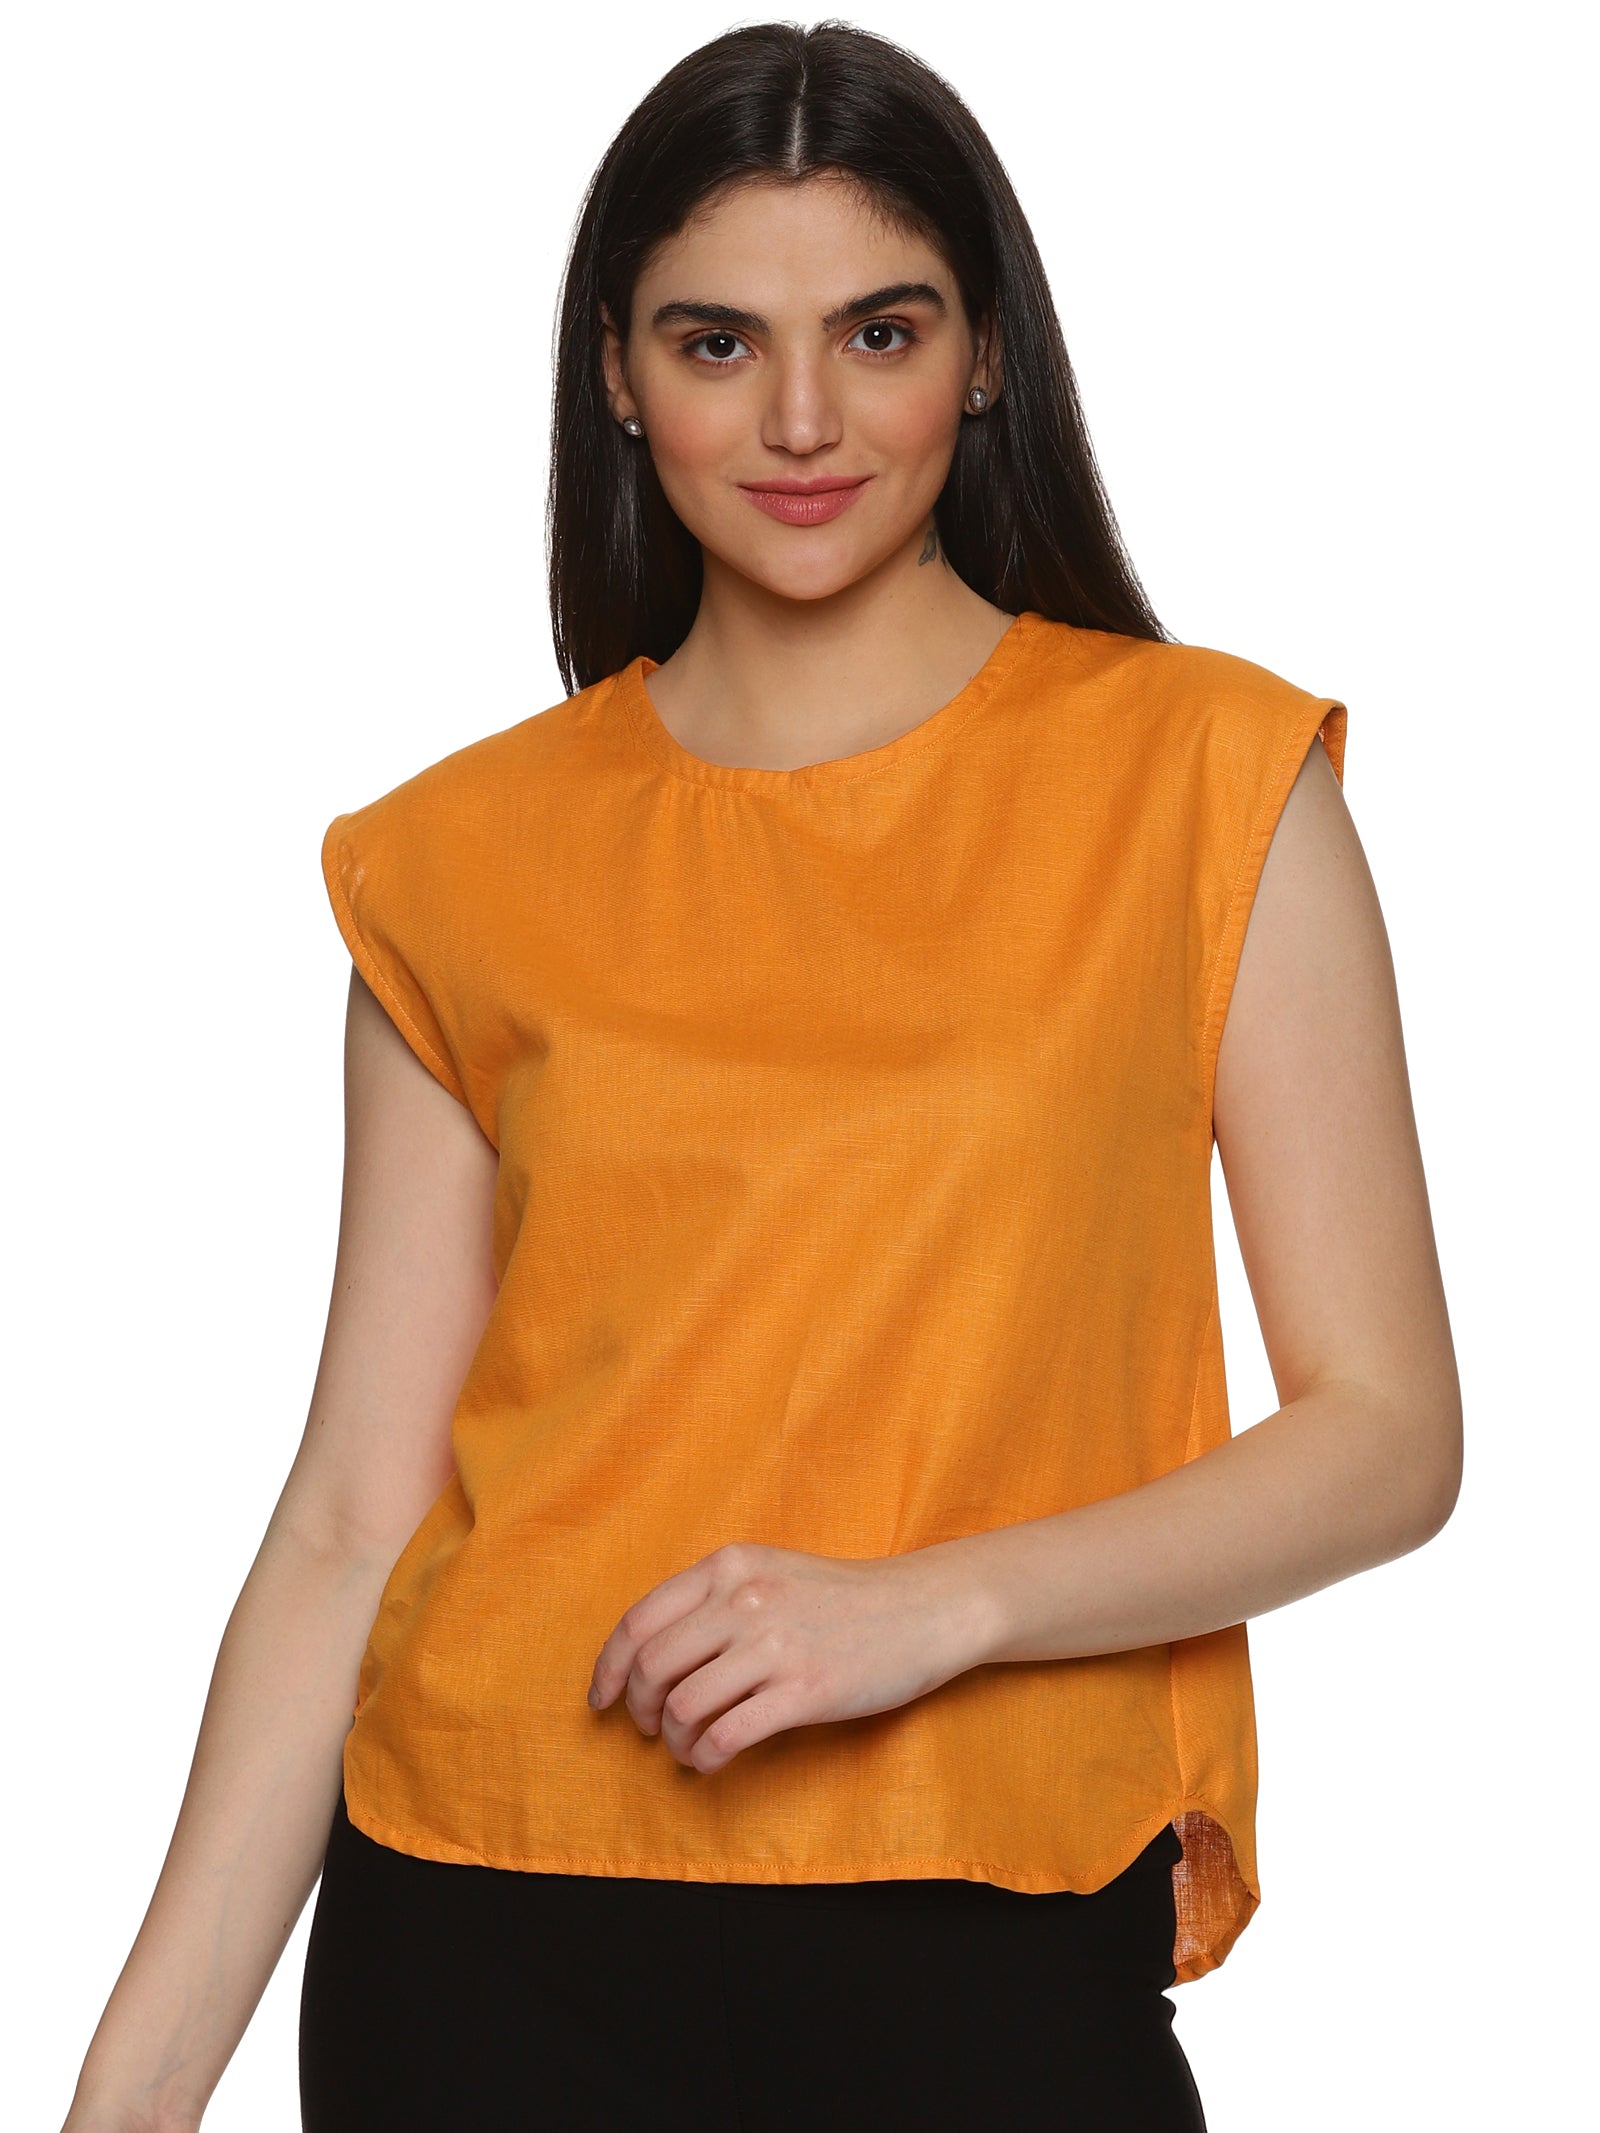 A model in Cotton Drop Shoulder Orange Top, a womens workwear is standing against a white background